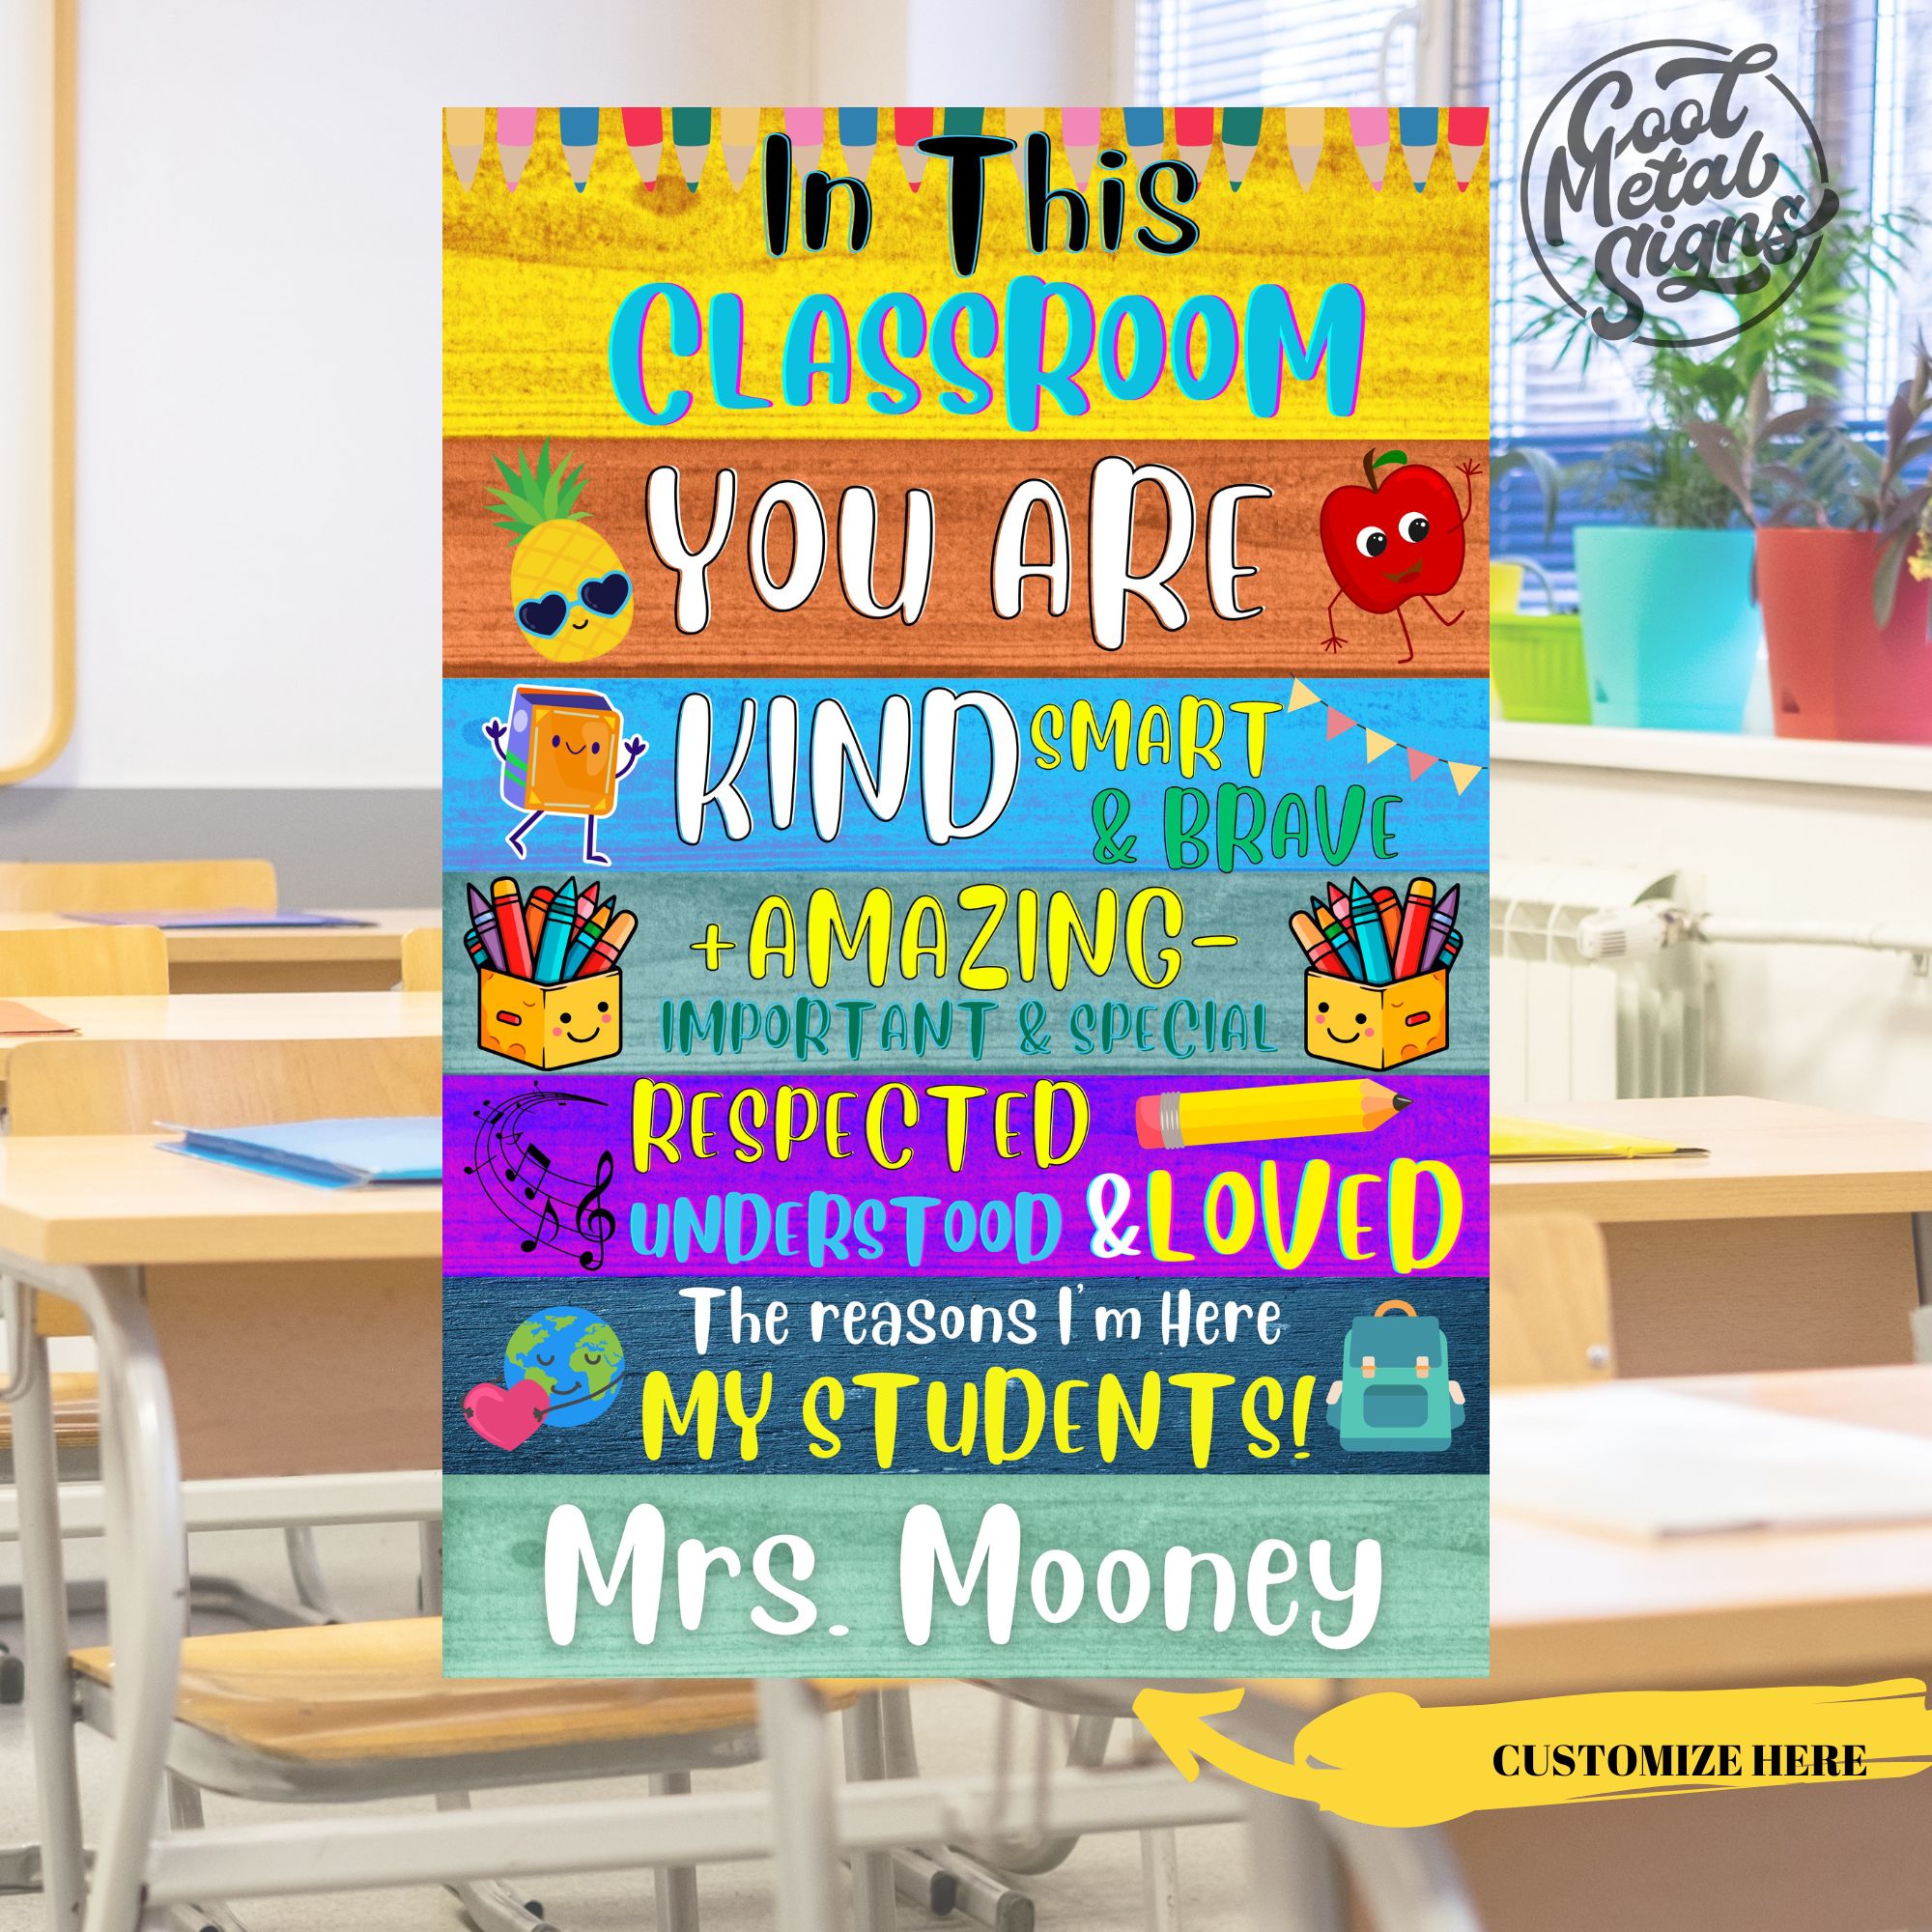 Personalized Classroom Metal Sign - Cool Metal Signs